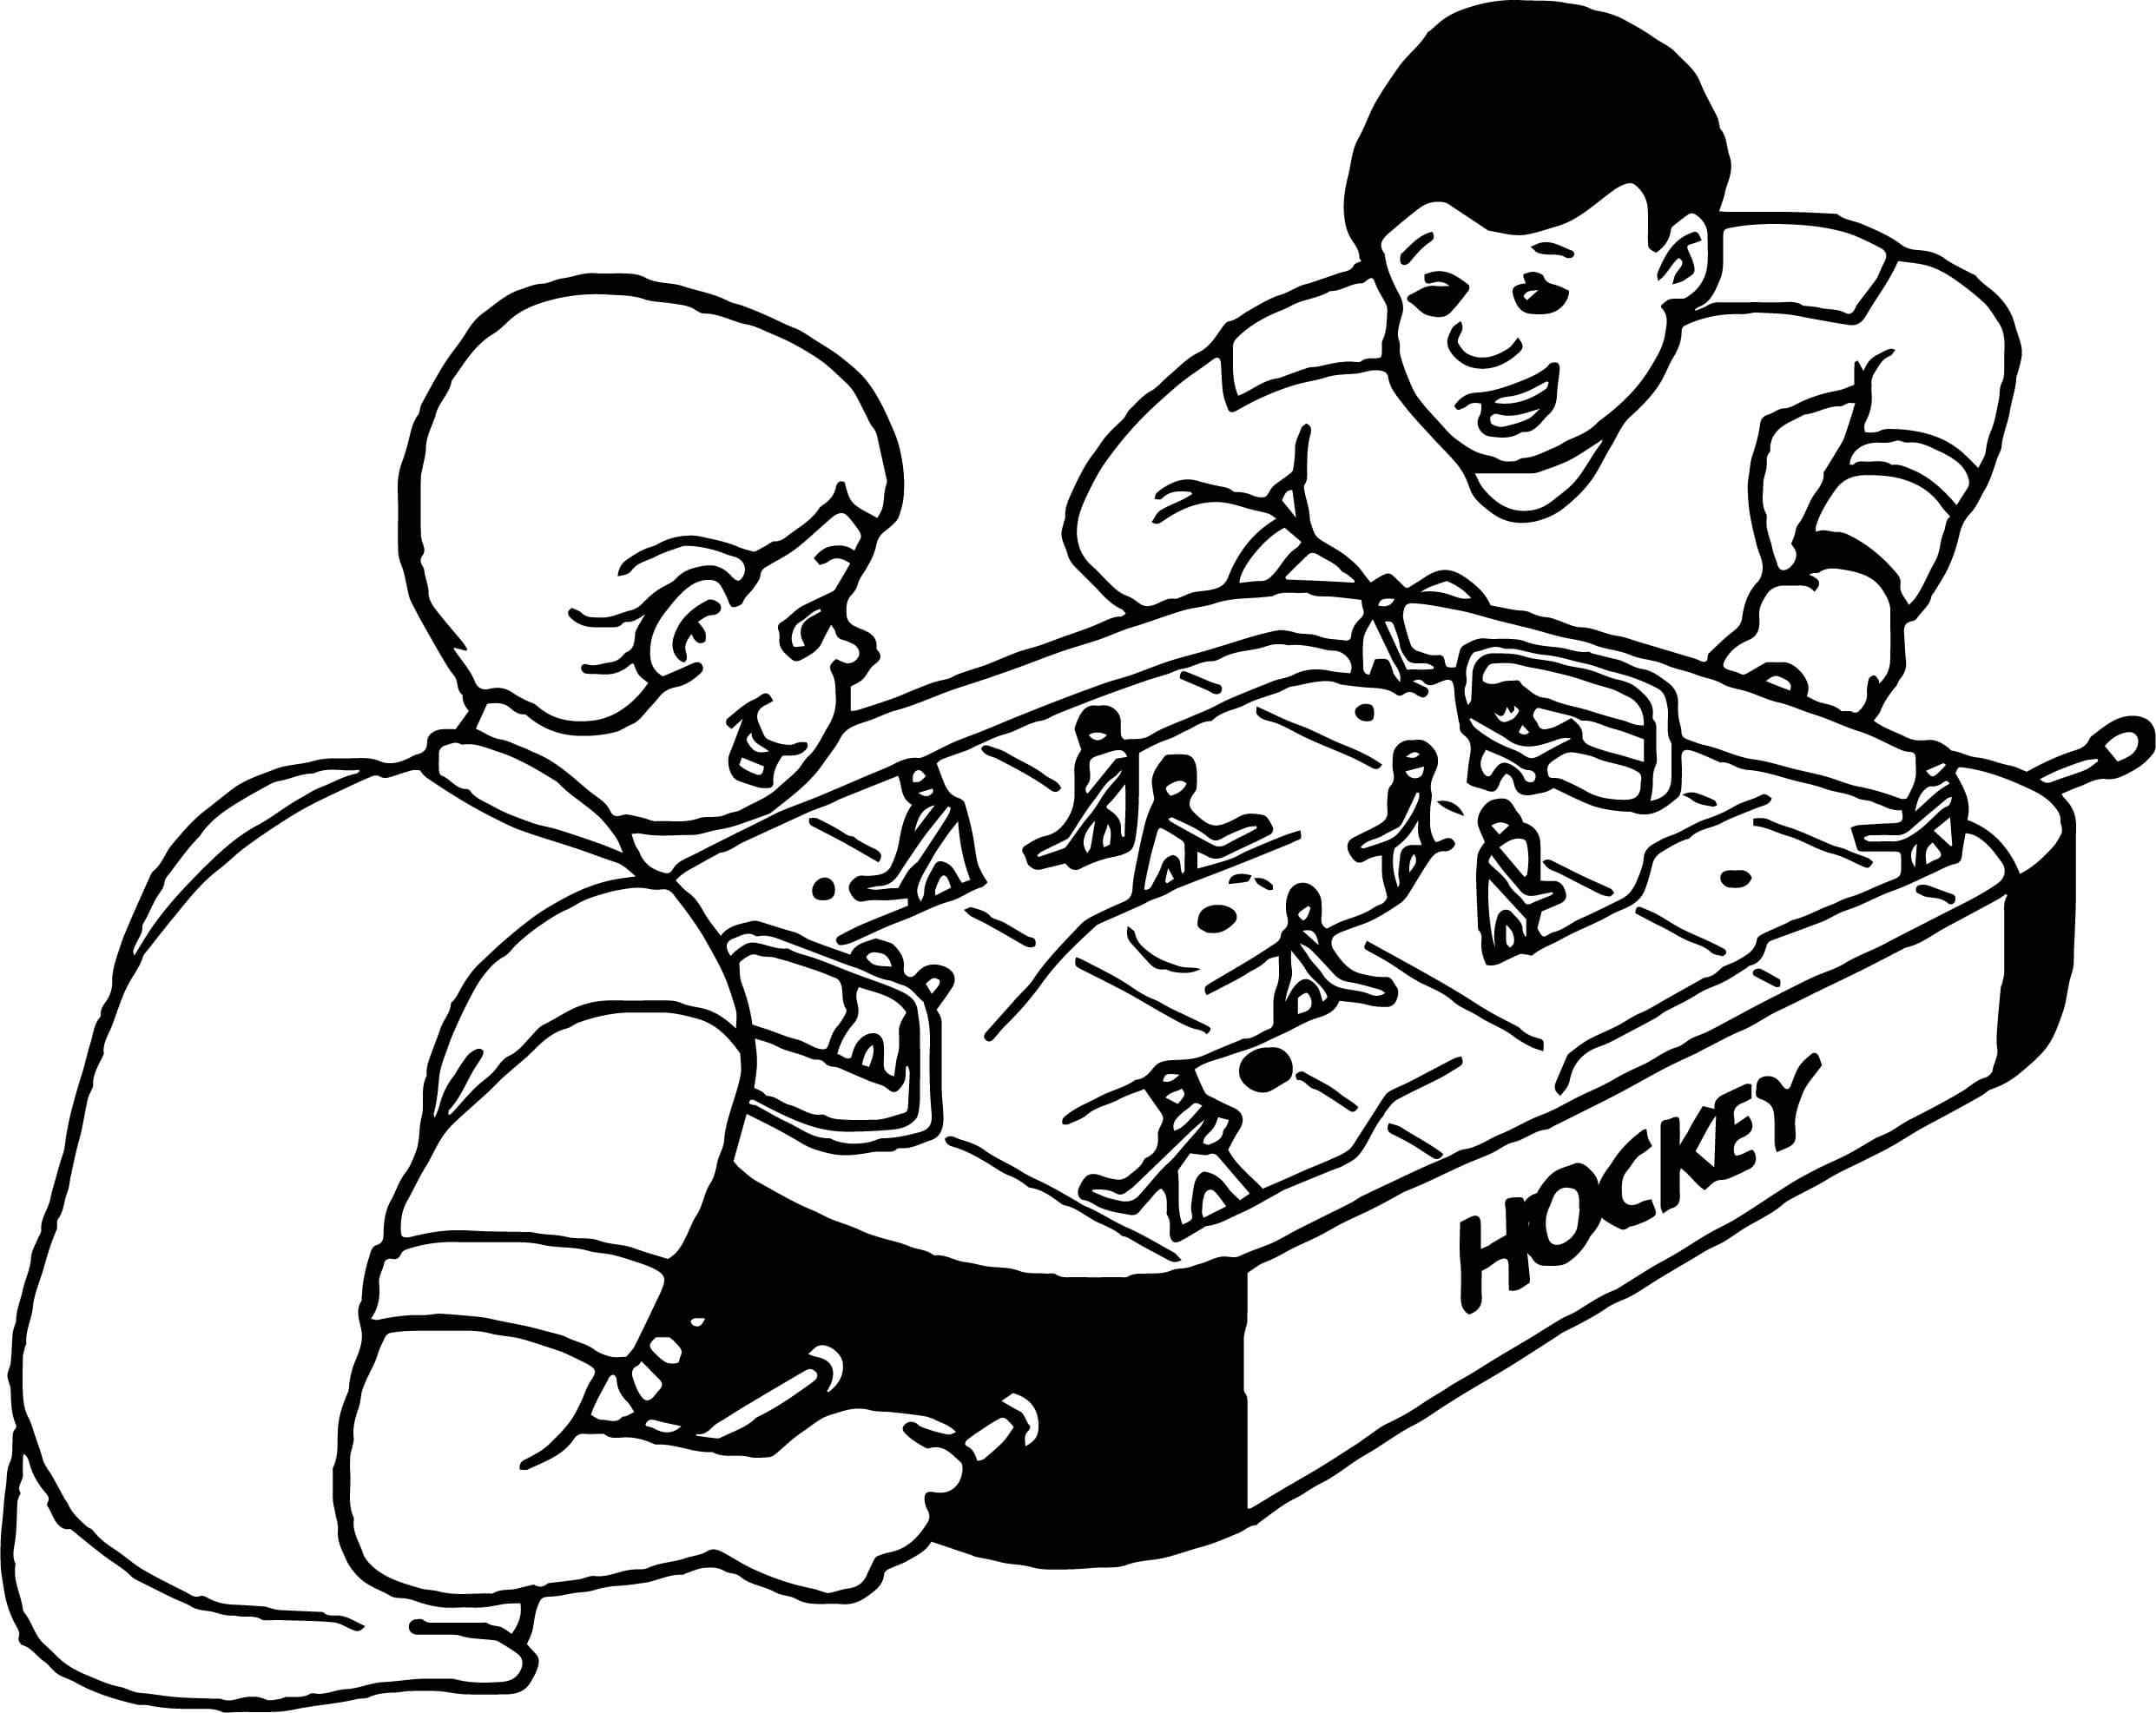 Table Hockey For Playing At Home